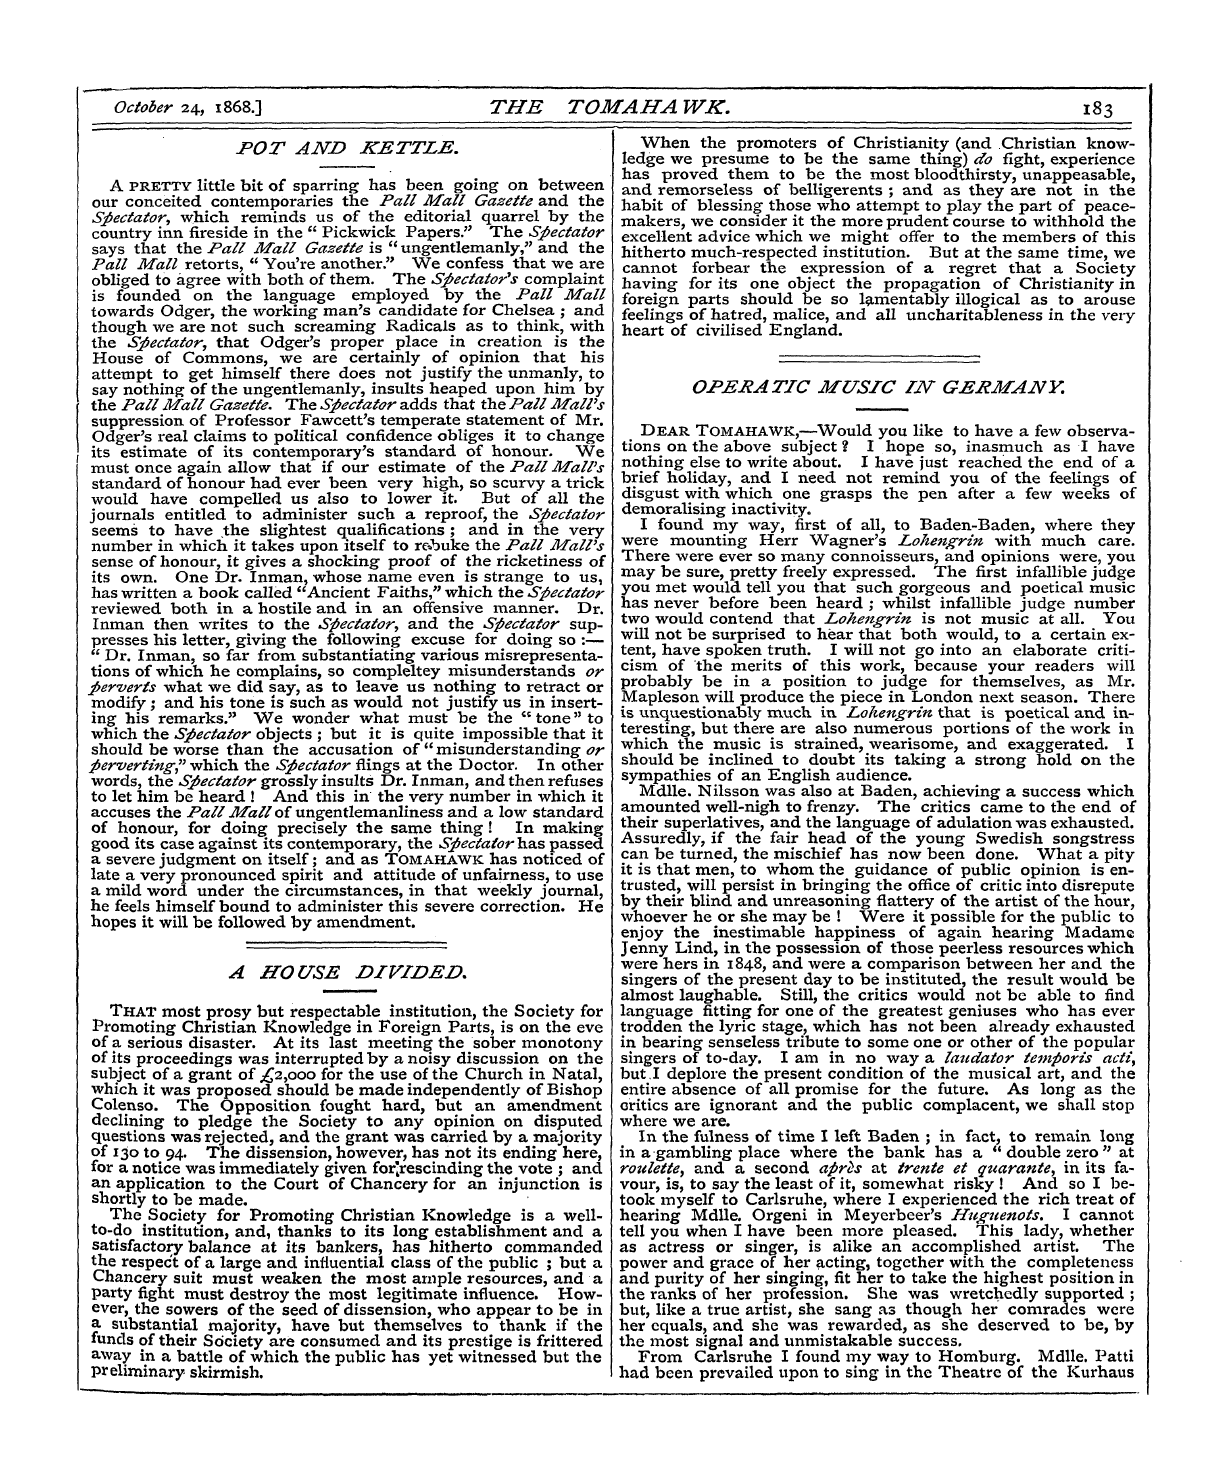 Tomahawk (1867-1870): jS F Y, 1st edition - Pot And Kettle.